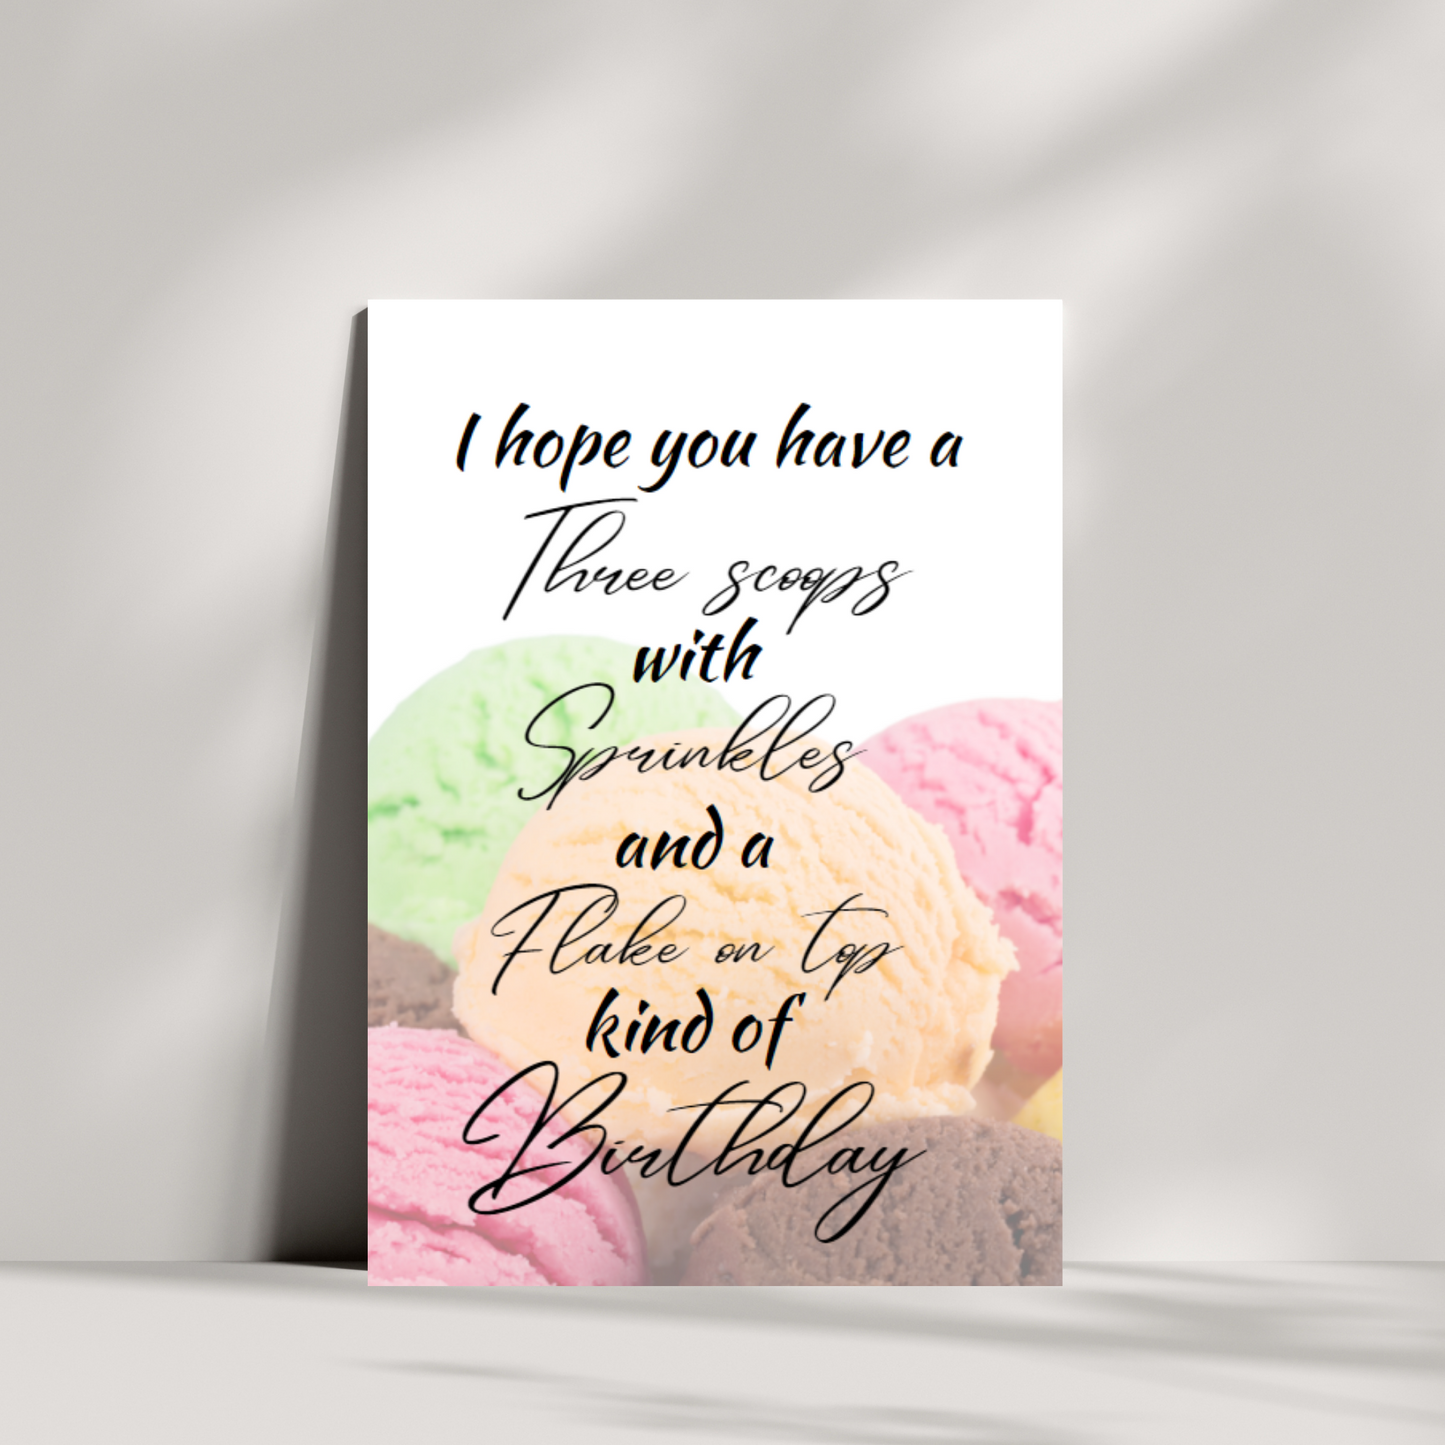 I hope you have a three scoops with sprinkles and a flake on top kind of birthday card